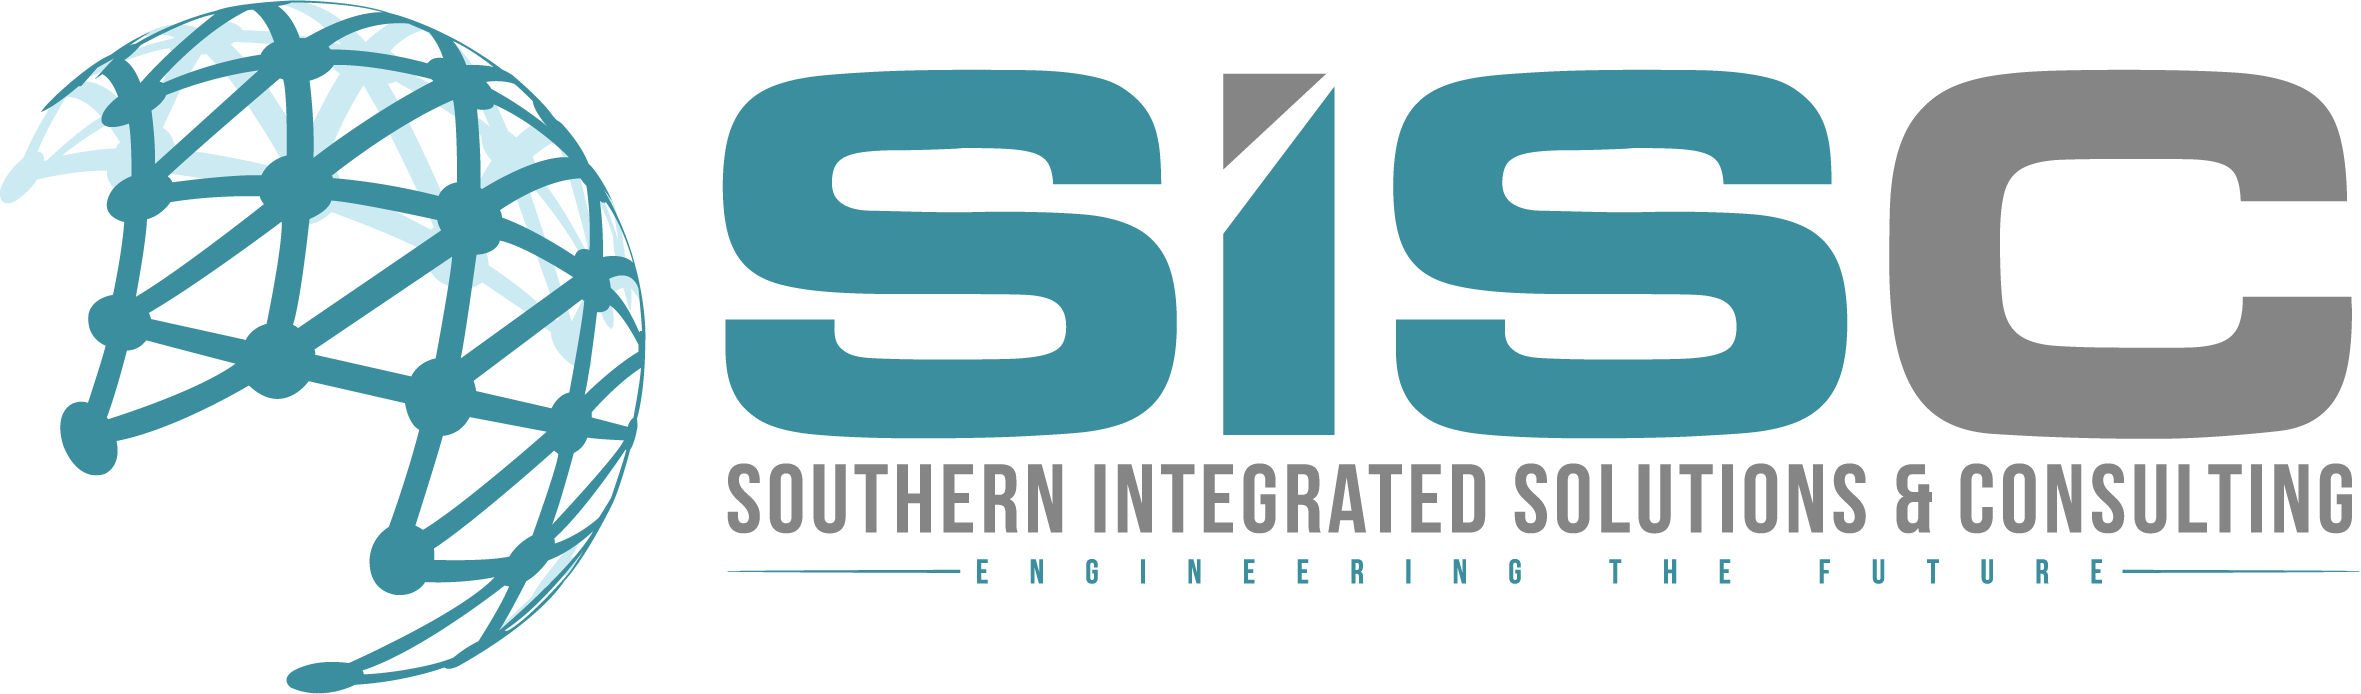 Southern Integrated Solutions & Consulting Logo